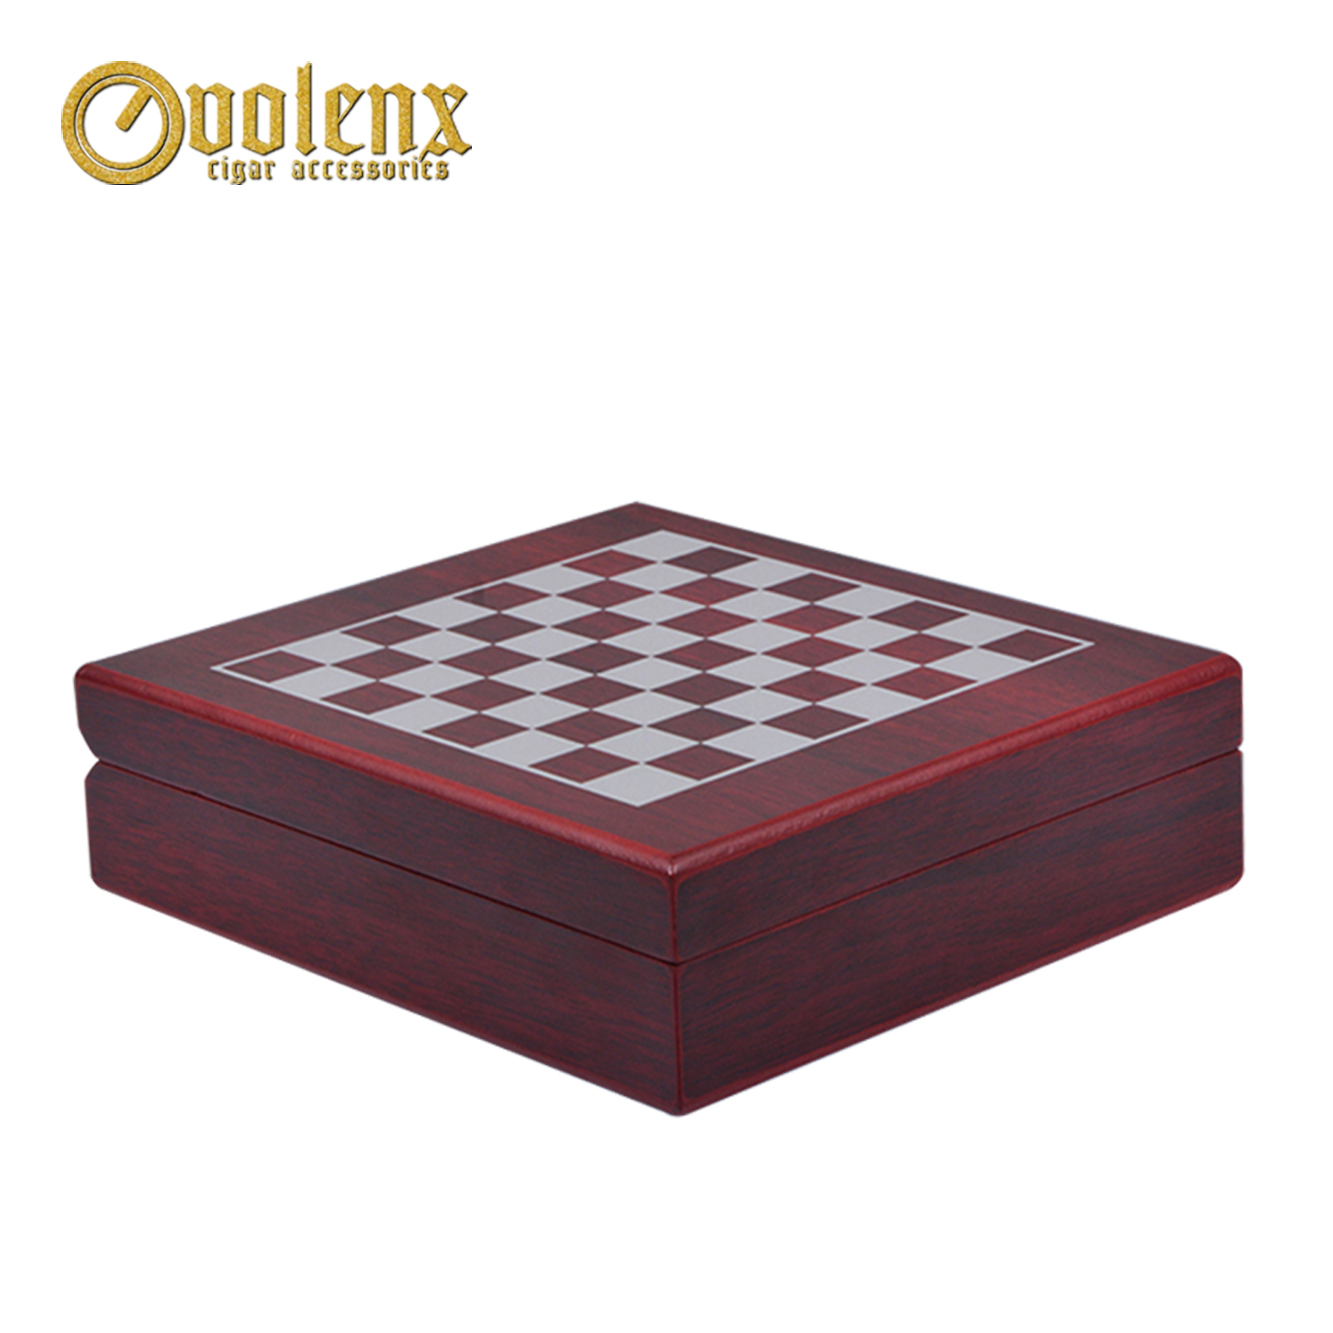 Hot-selling New Design Chinese chess set wooden wine box set 7